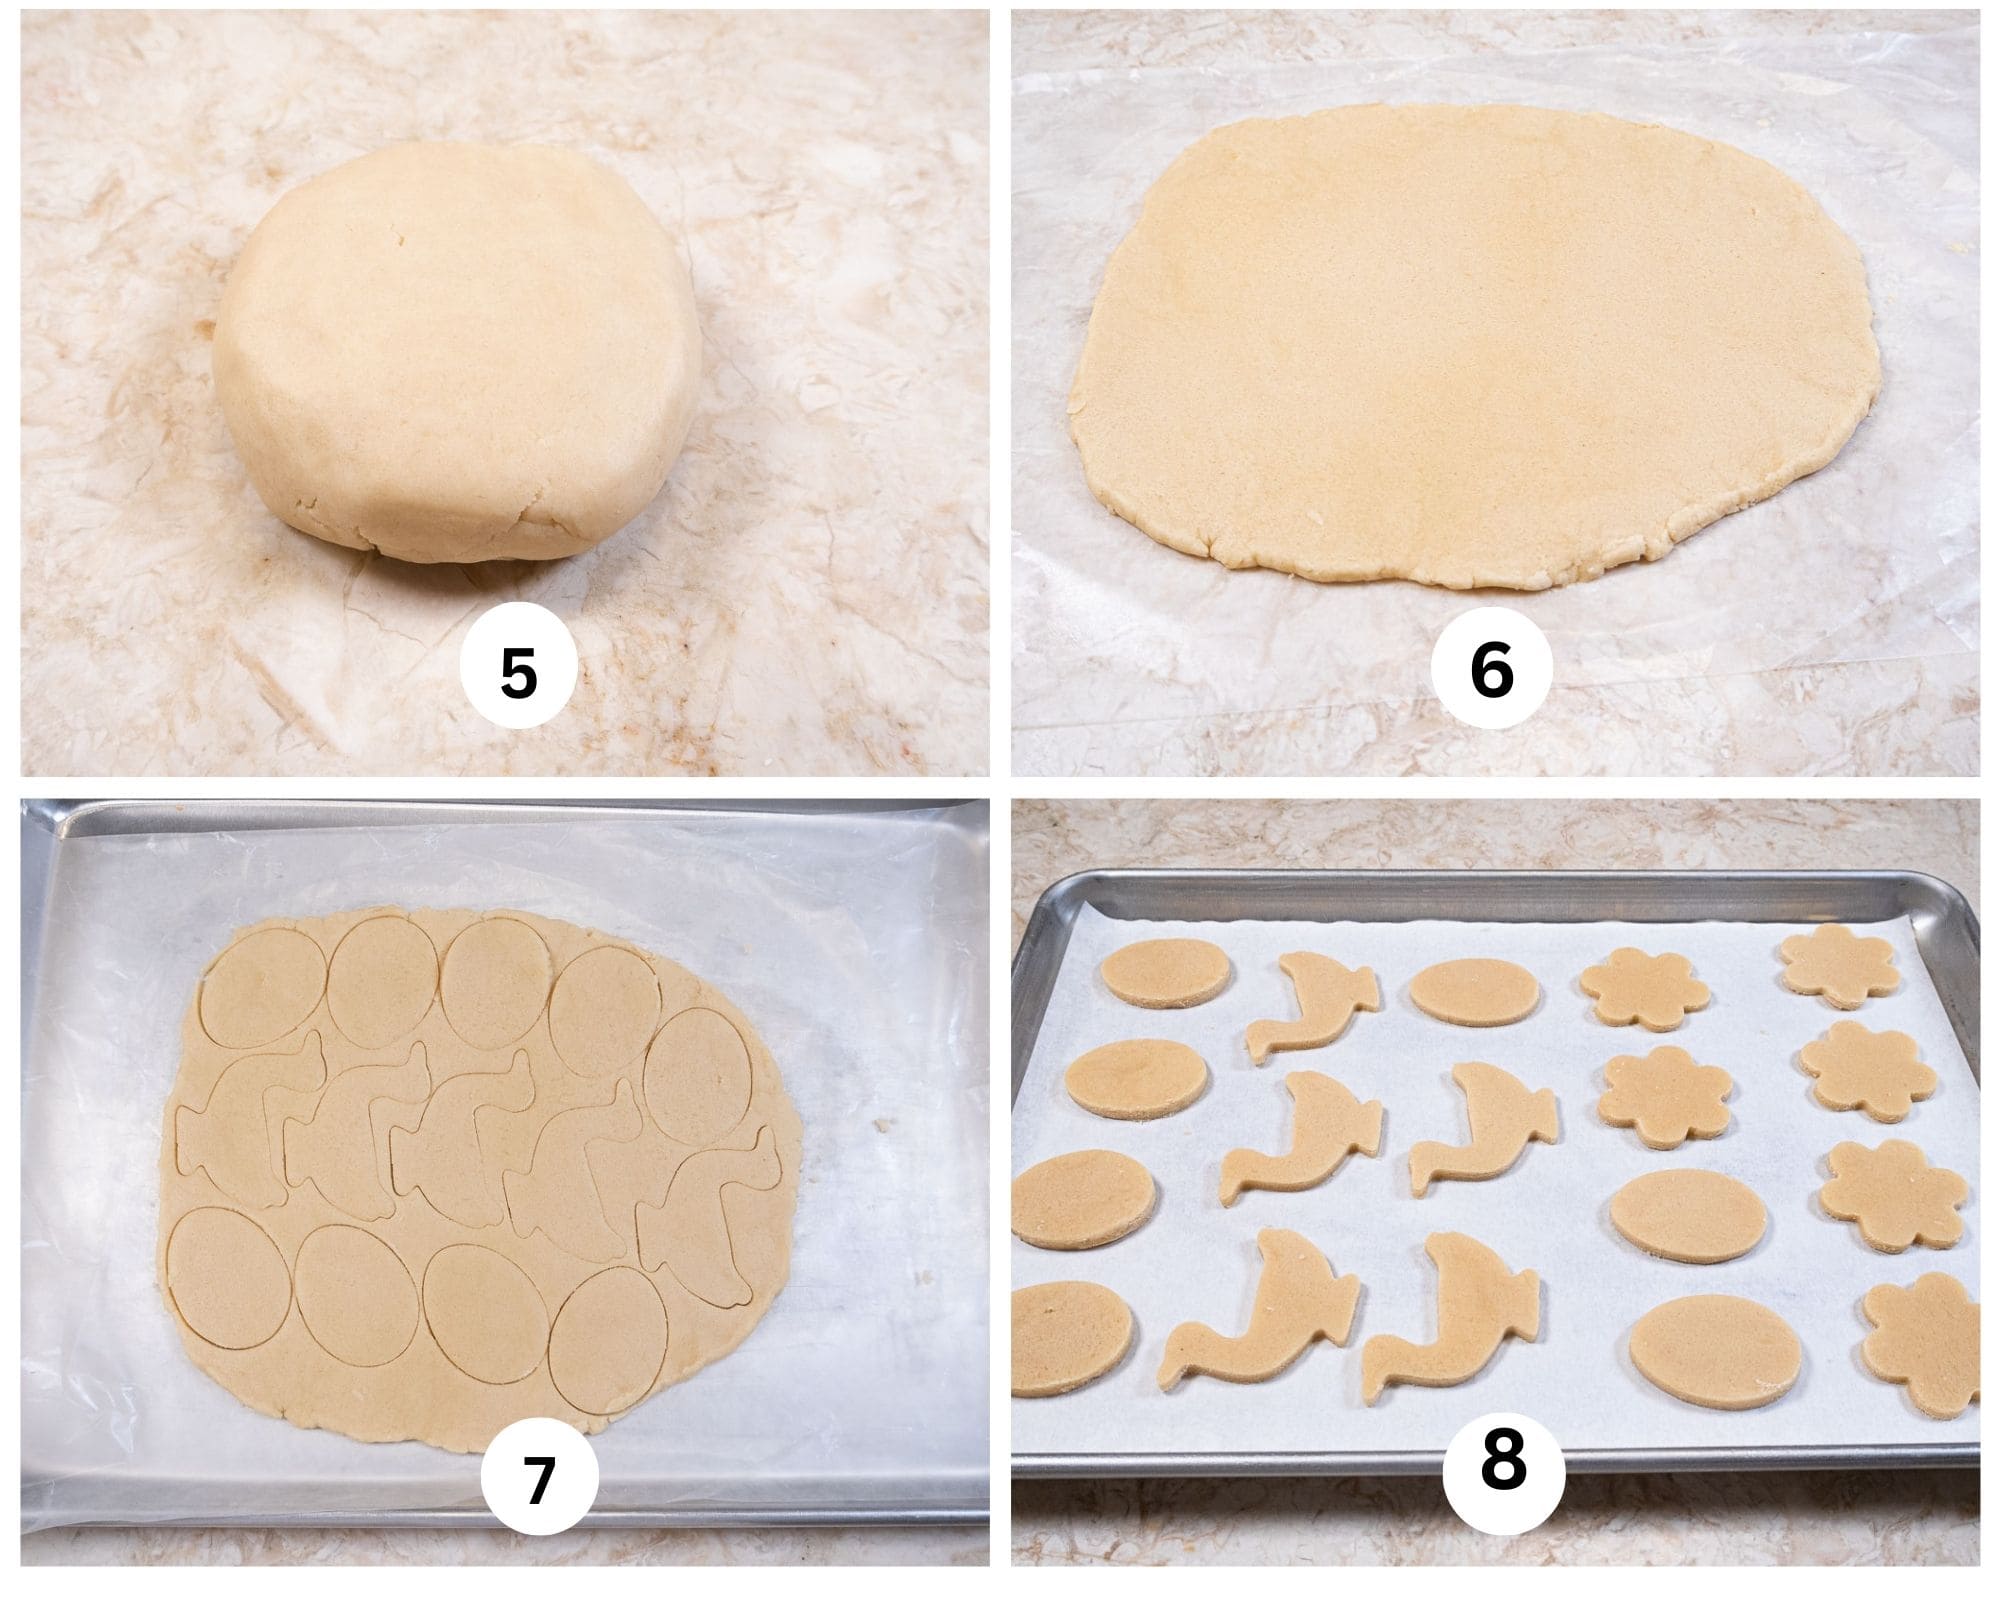 This collage shows the dough flattened, rolled out, cookies cut, and on the tray